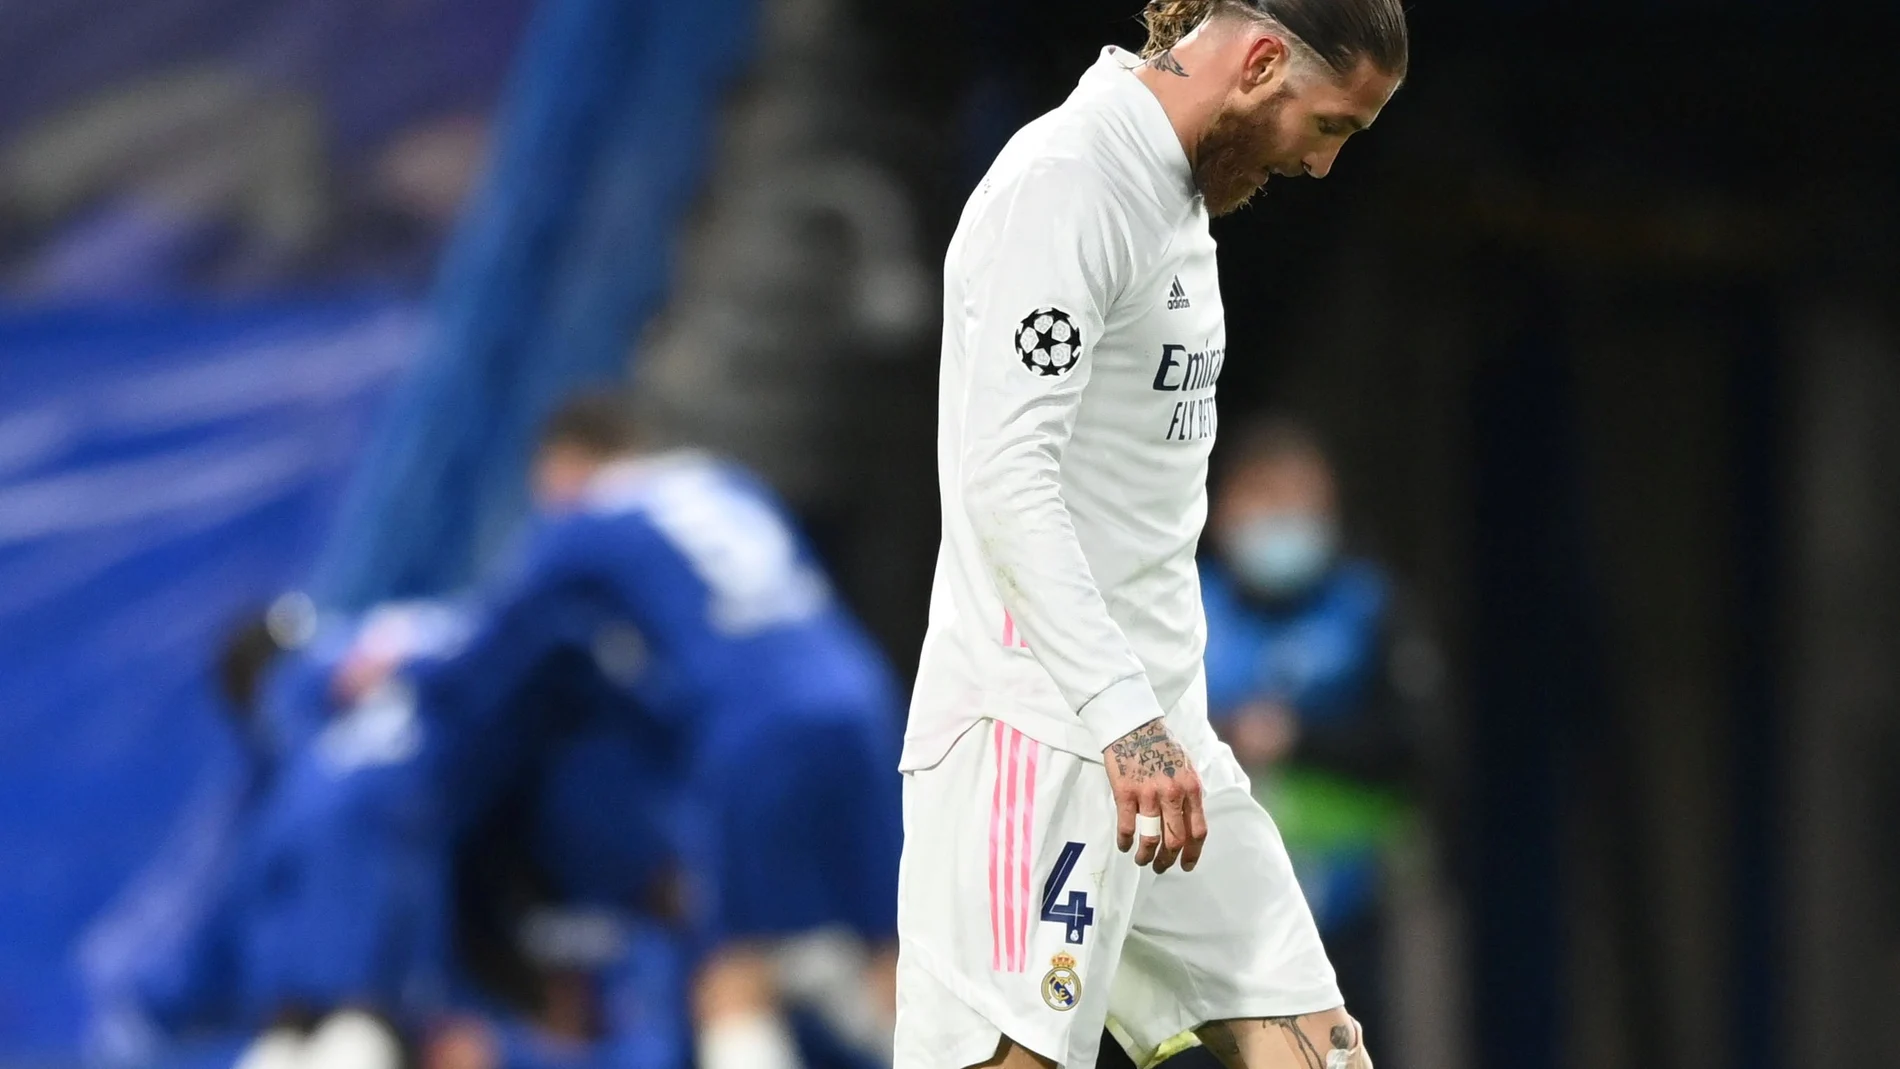 Soccer Football - Champions League - Semi Final Second Leg - Chelsea v Real Madrid - Stamford Bridge, London, Britain - May 5, 2021 Real Madrid's Sergio Ramos looks dejected after Chelsea's Mason Mount scored their second goal REUTERS/Toby Melville TPX IMAGES OF THE DAY